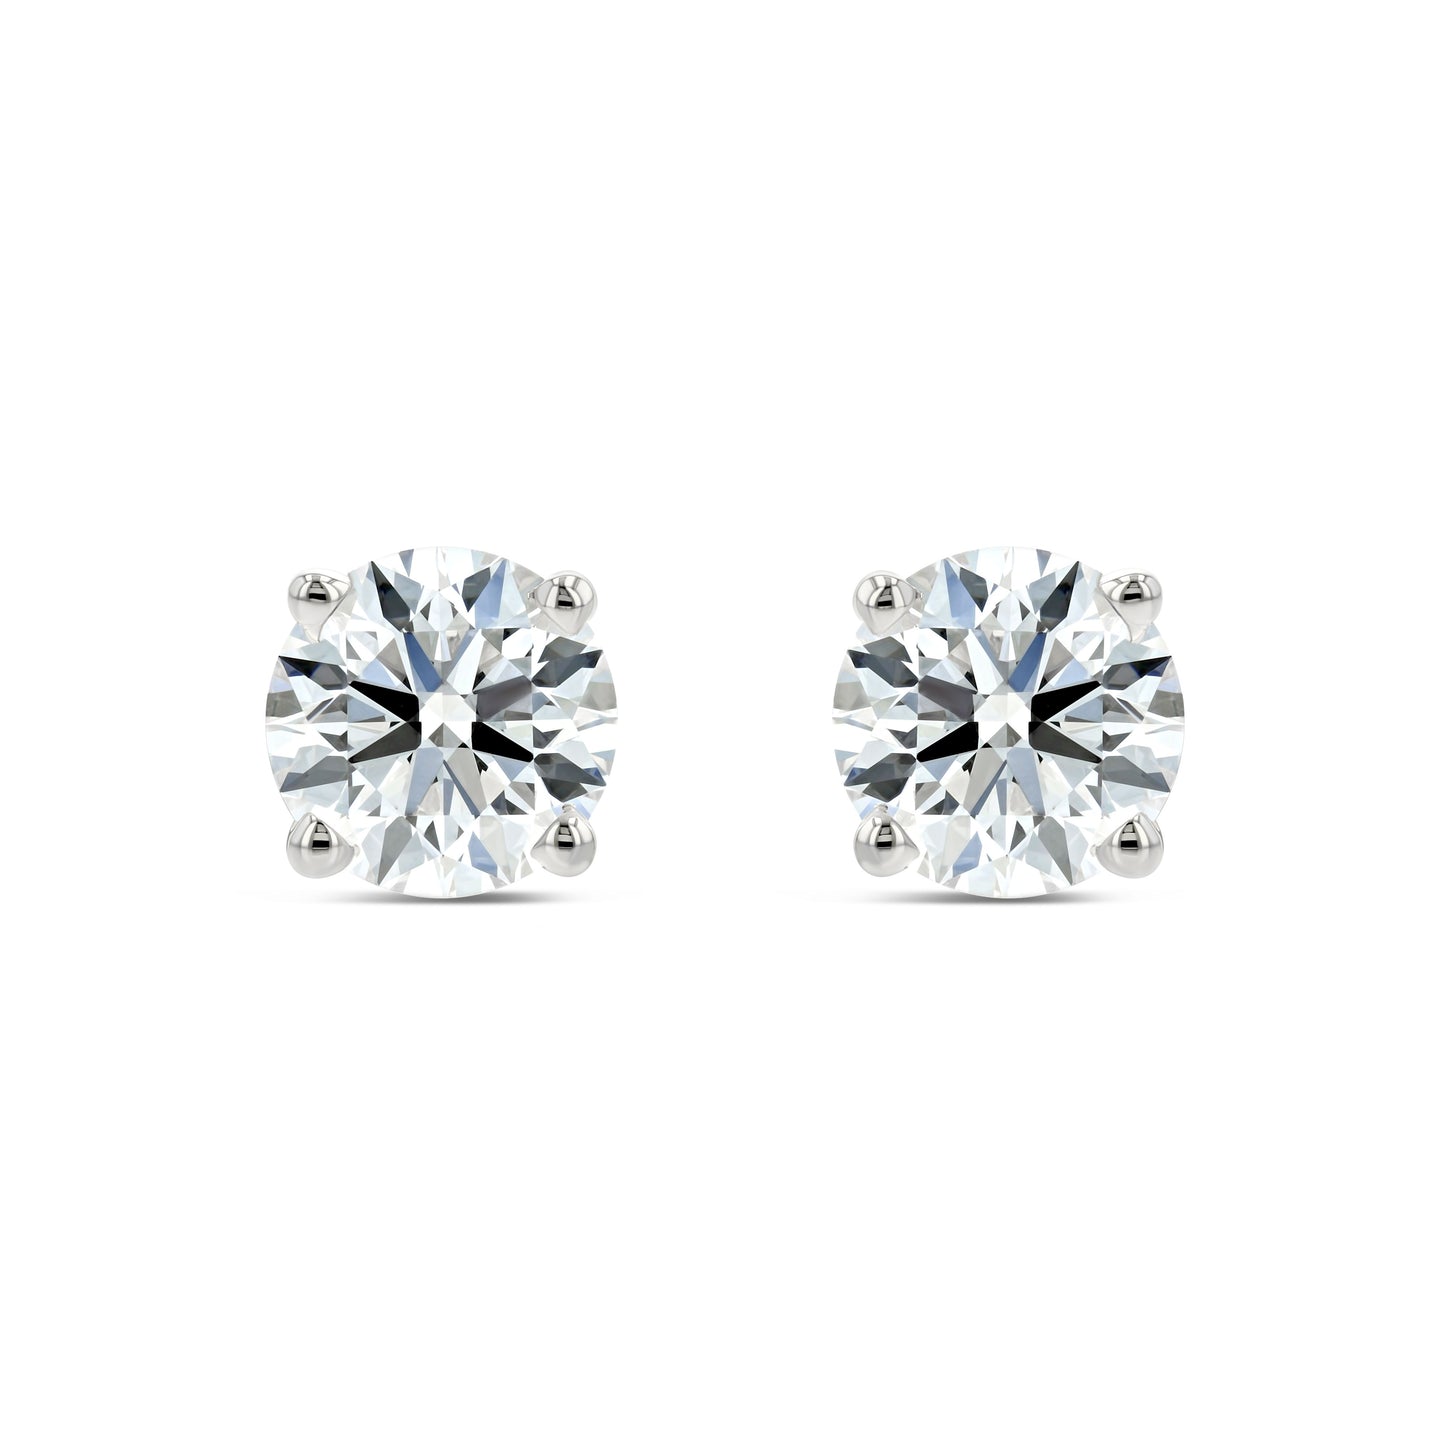 14k White Gold 4-prong Round Diamond Stud Earrings 1ctw (5.00mm Ea), H Color, Si3-i1 Clarity